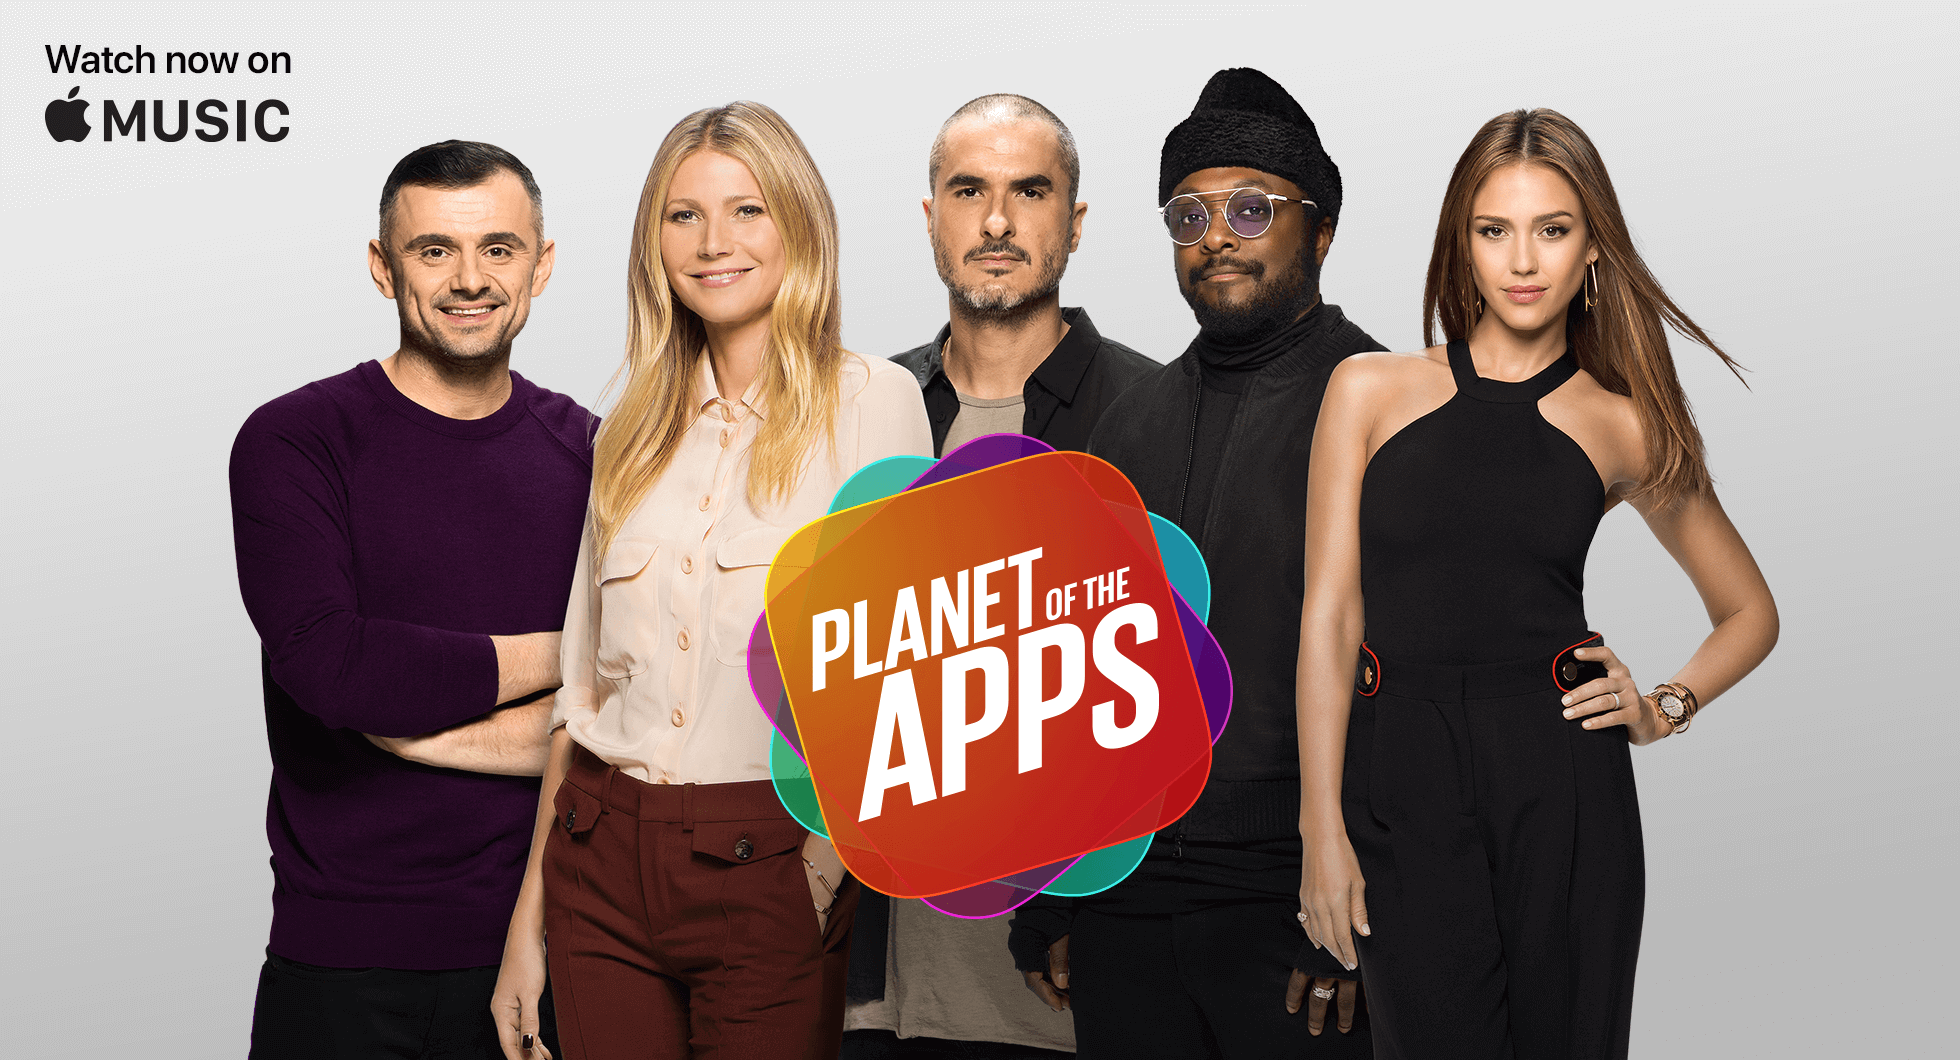 Gwyneth Paltrow, Jessica Alba, will i. am, Gary V talk about ‘Planet of the Apps’